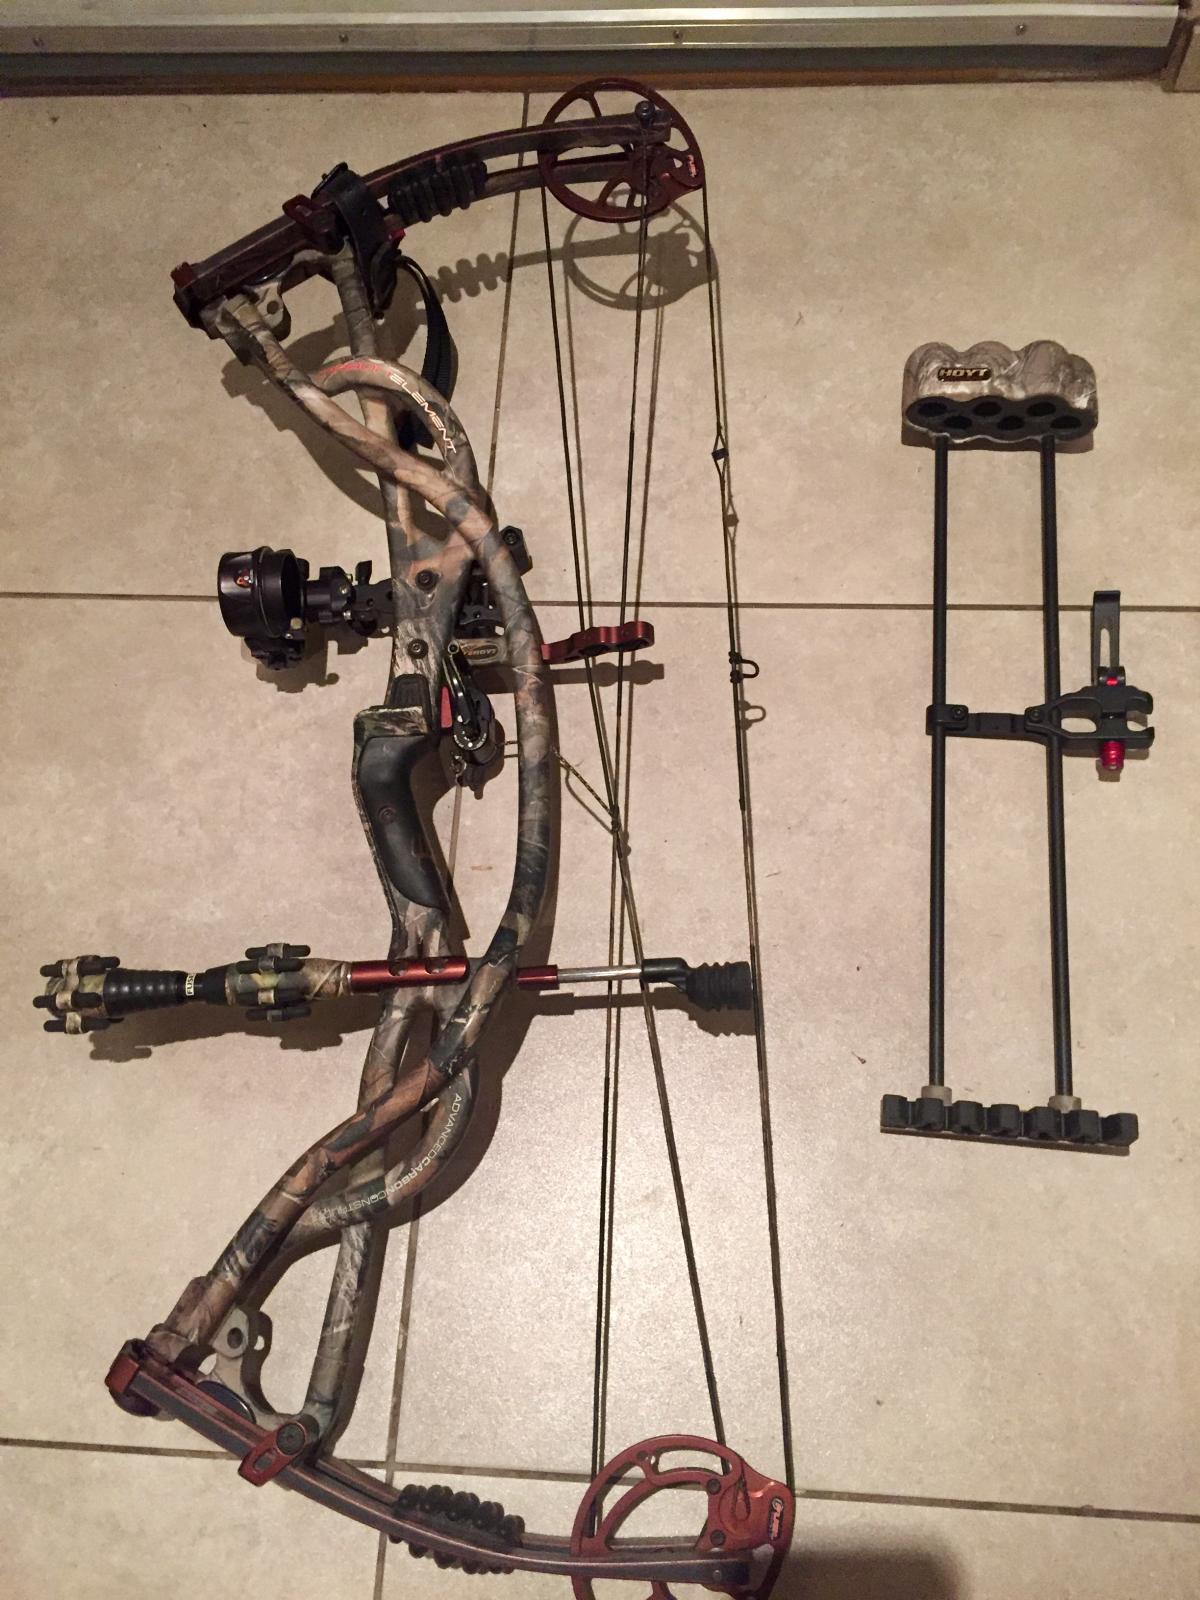 hoyt bow serial number location